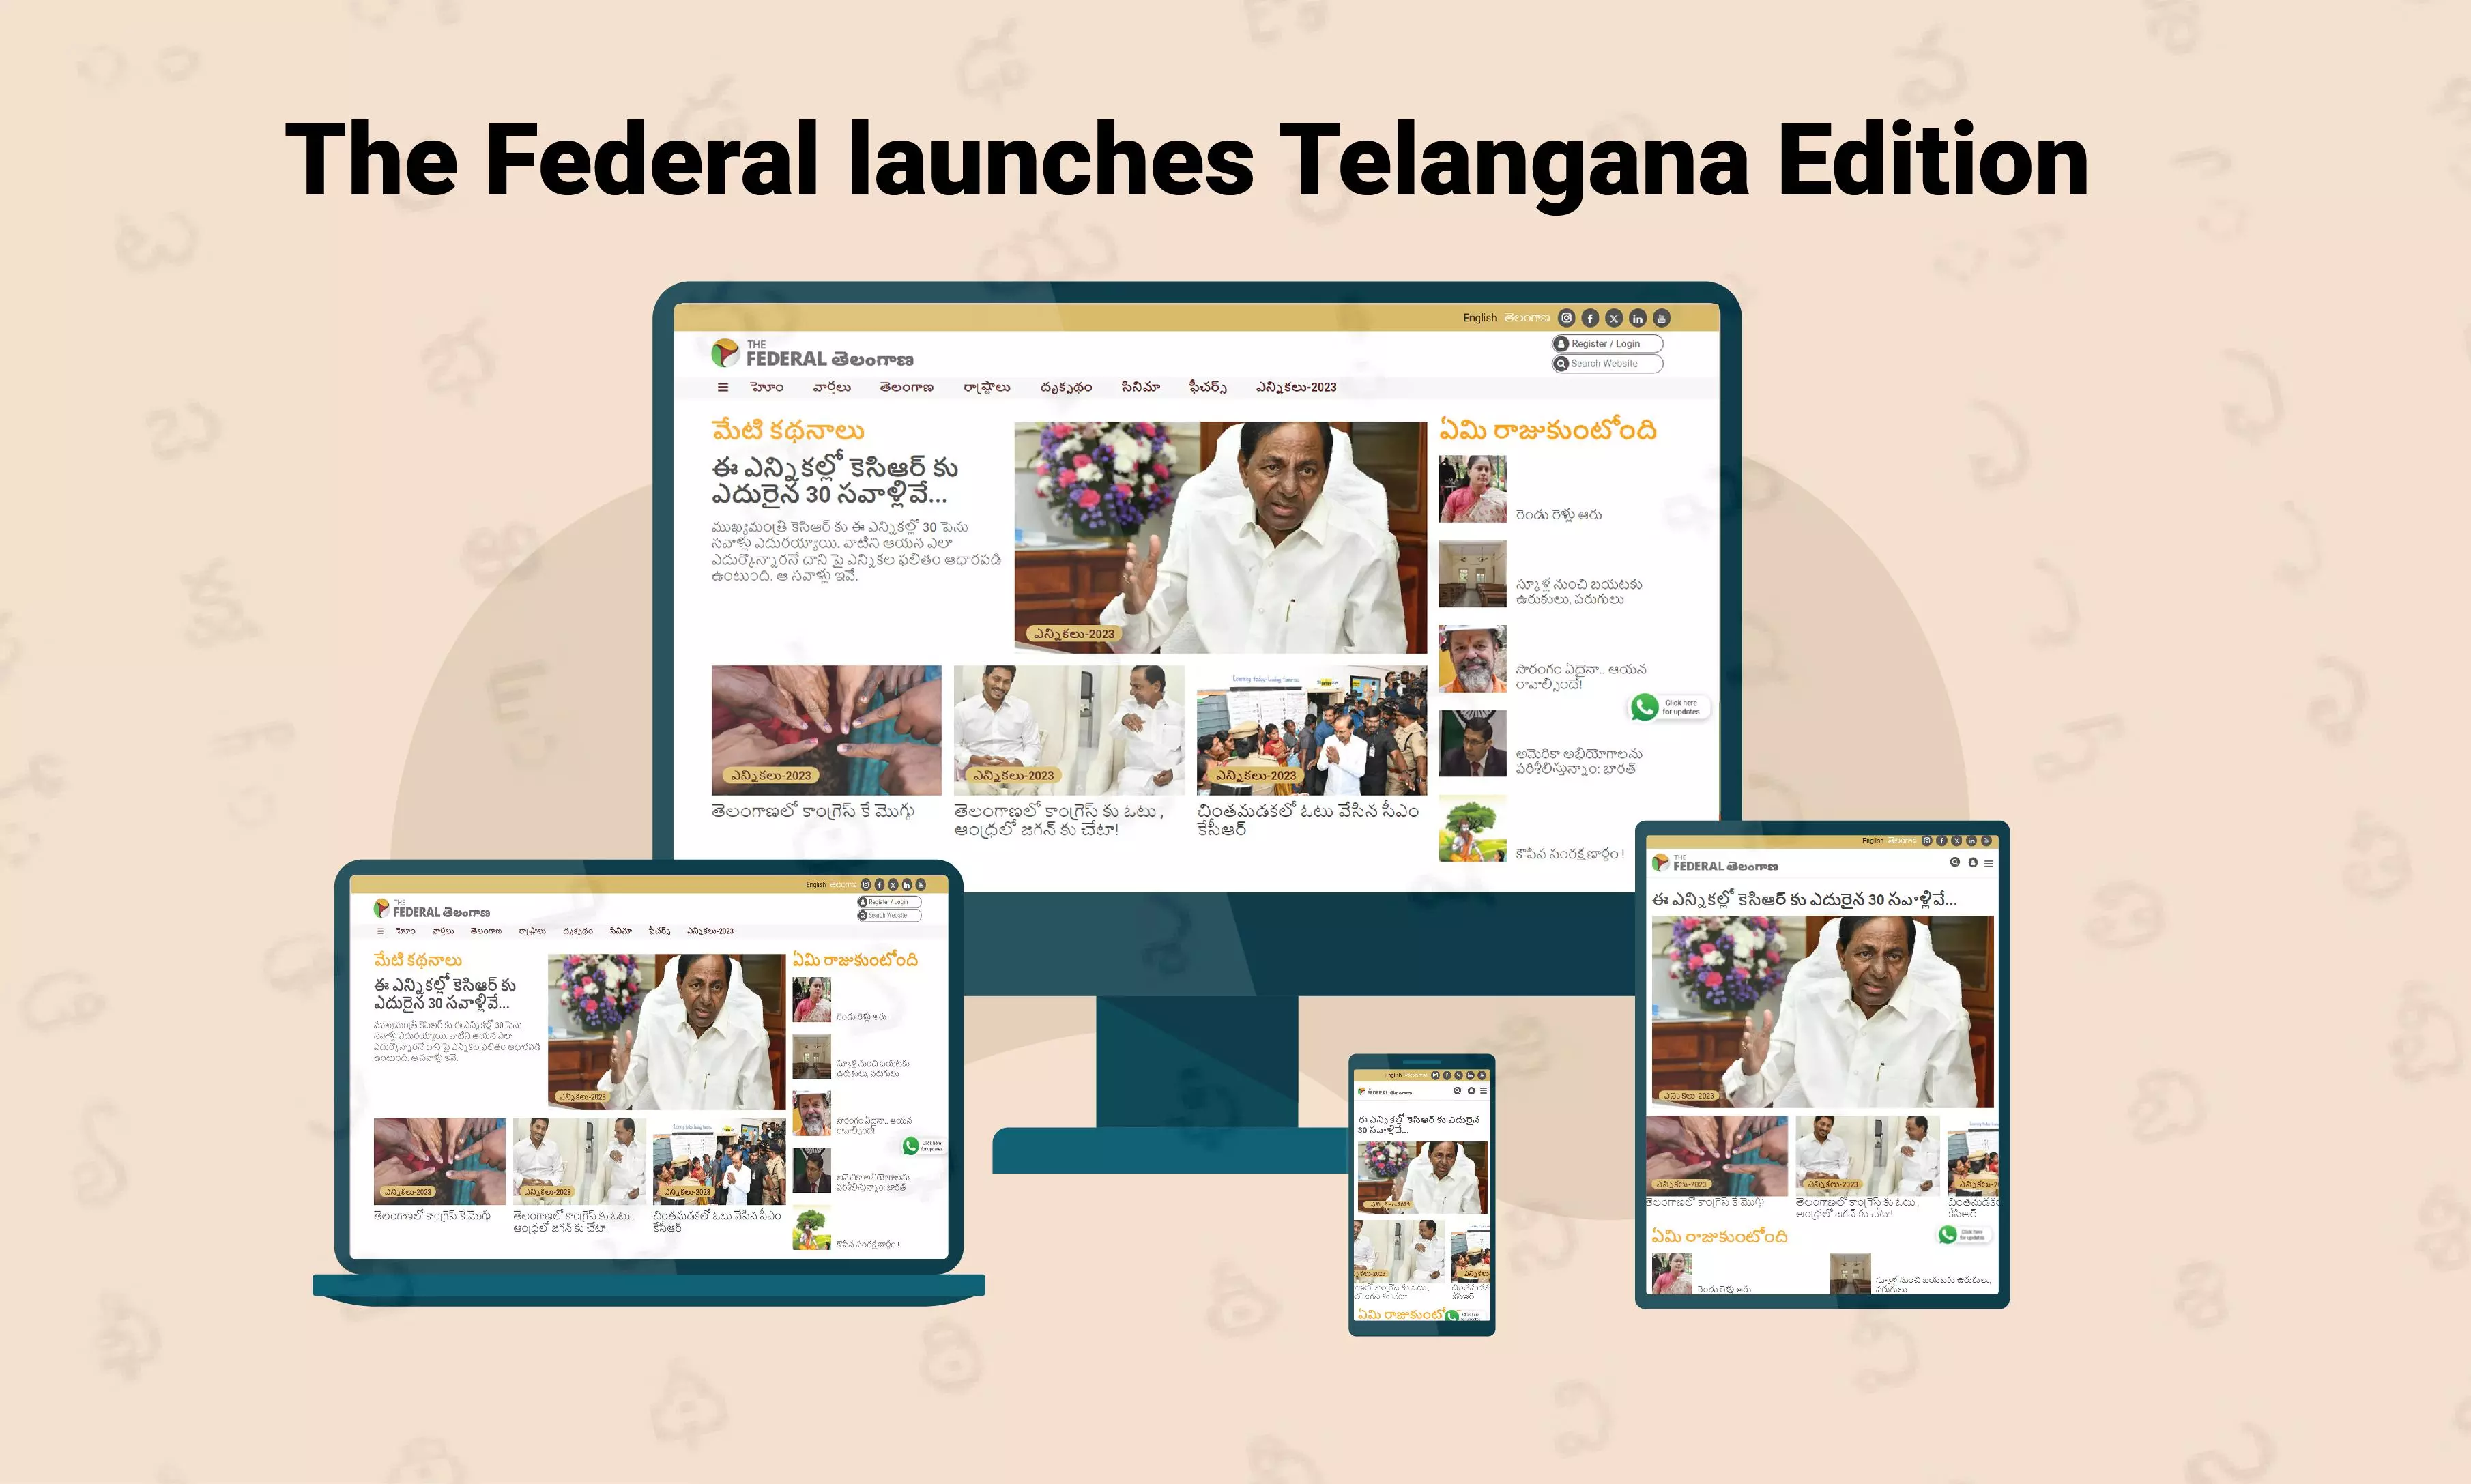 Breaking News: The Federal launches its Telangana edition